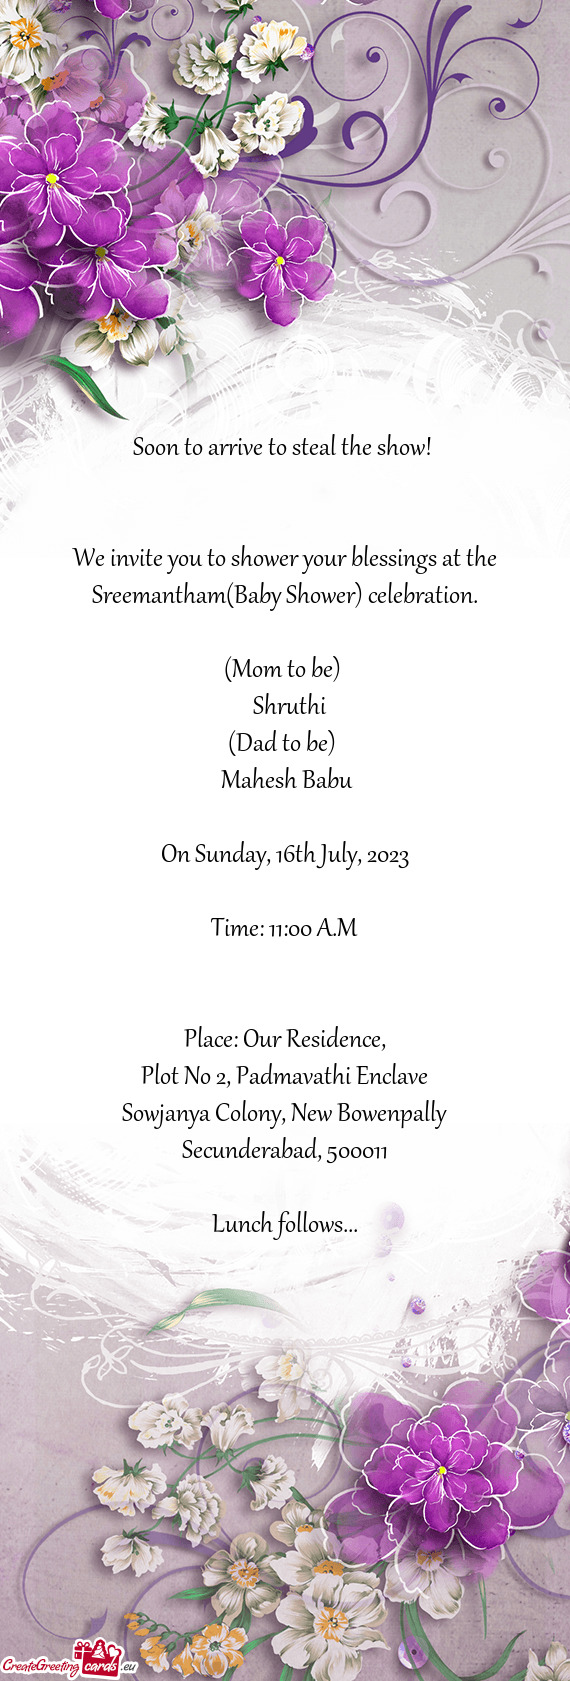 We invite you to shower your blessings at the Sreemantham(Baby Shower) celebration